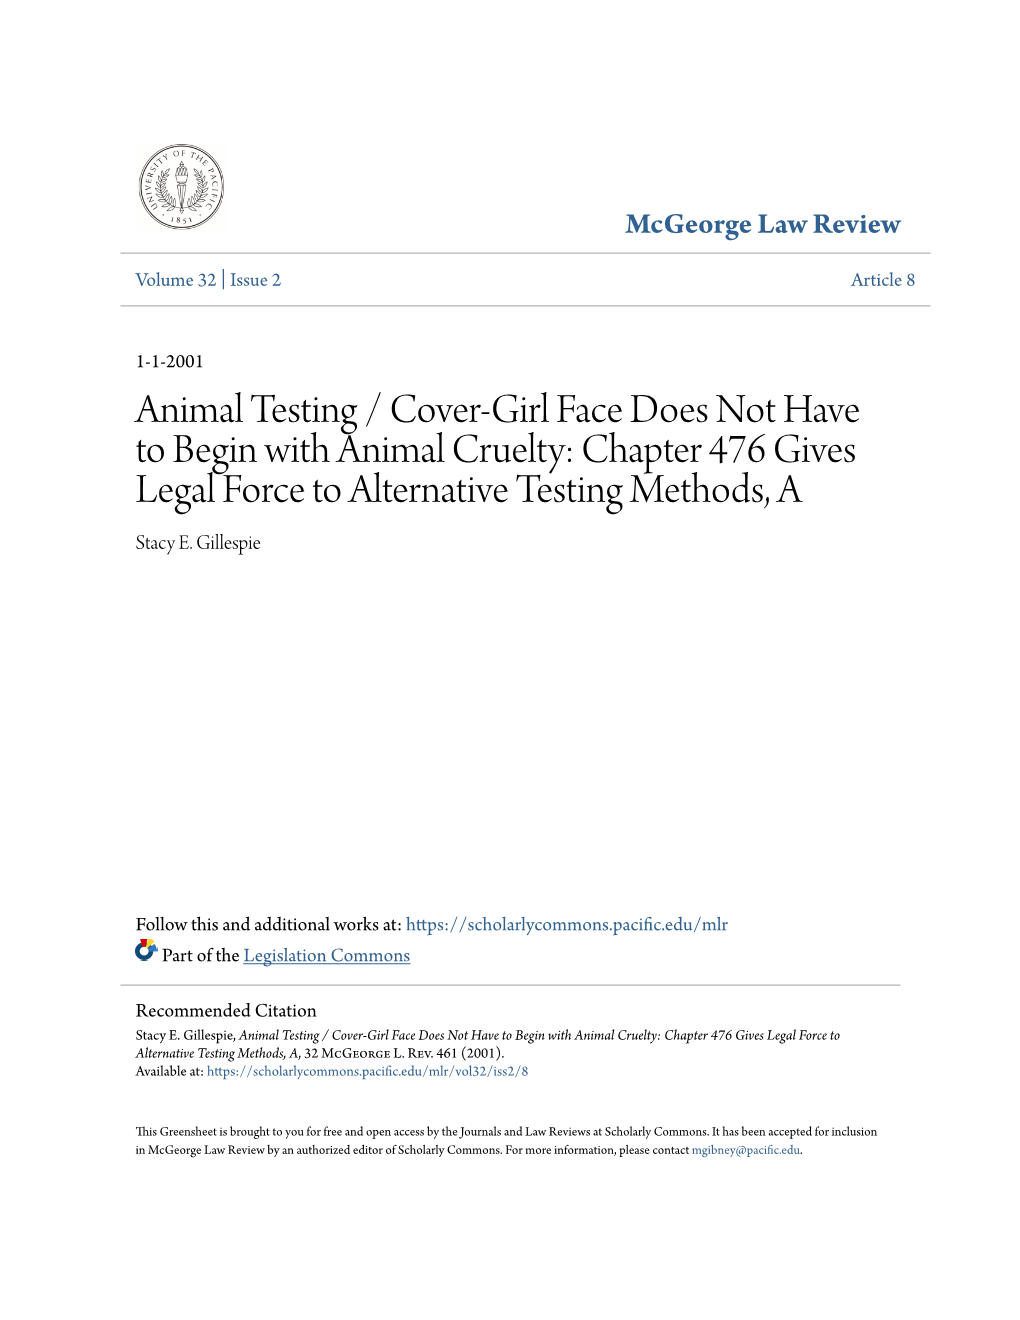 Animal Testing / Cover-Girl Face Does Not Have to Begin with Animal Cruelty: Chapter 476 Gives Legal Force to Alternative Testing Methods, a Stacy E